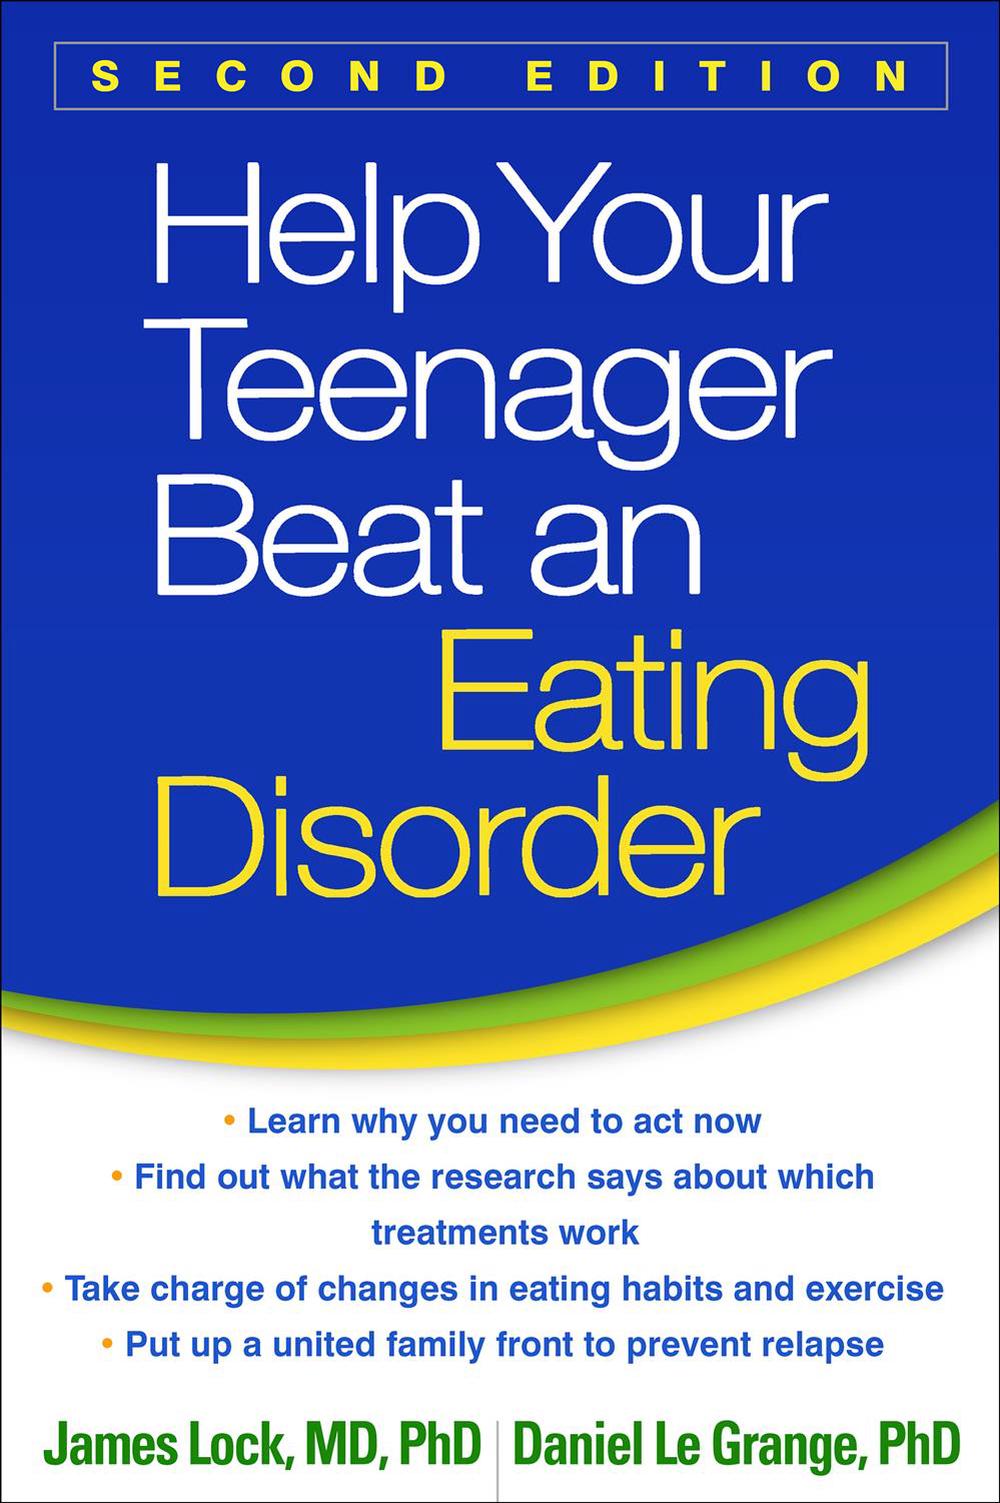 Help Your Teenager Beat an Eating Disorder by James Lock ...